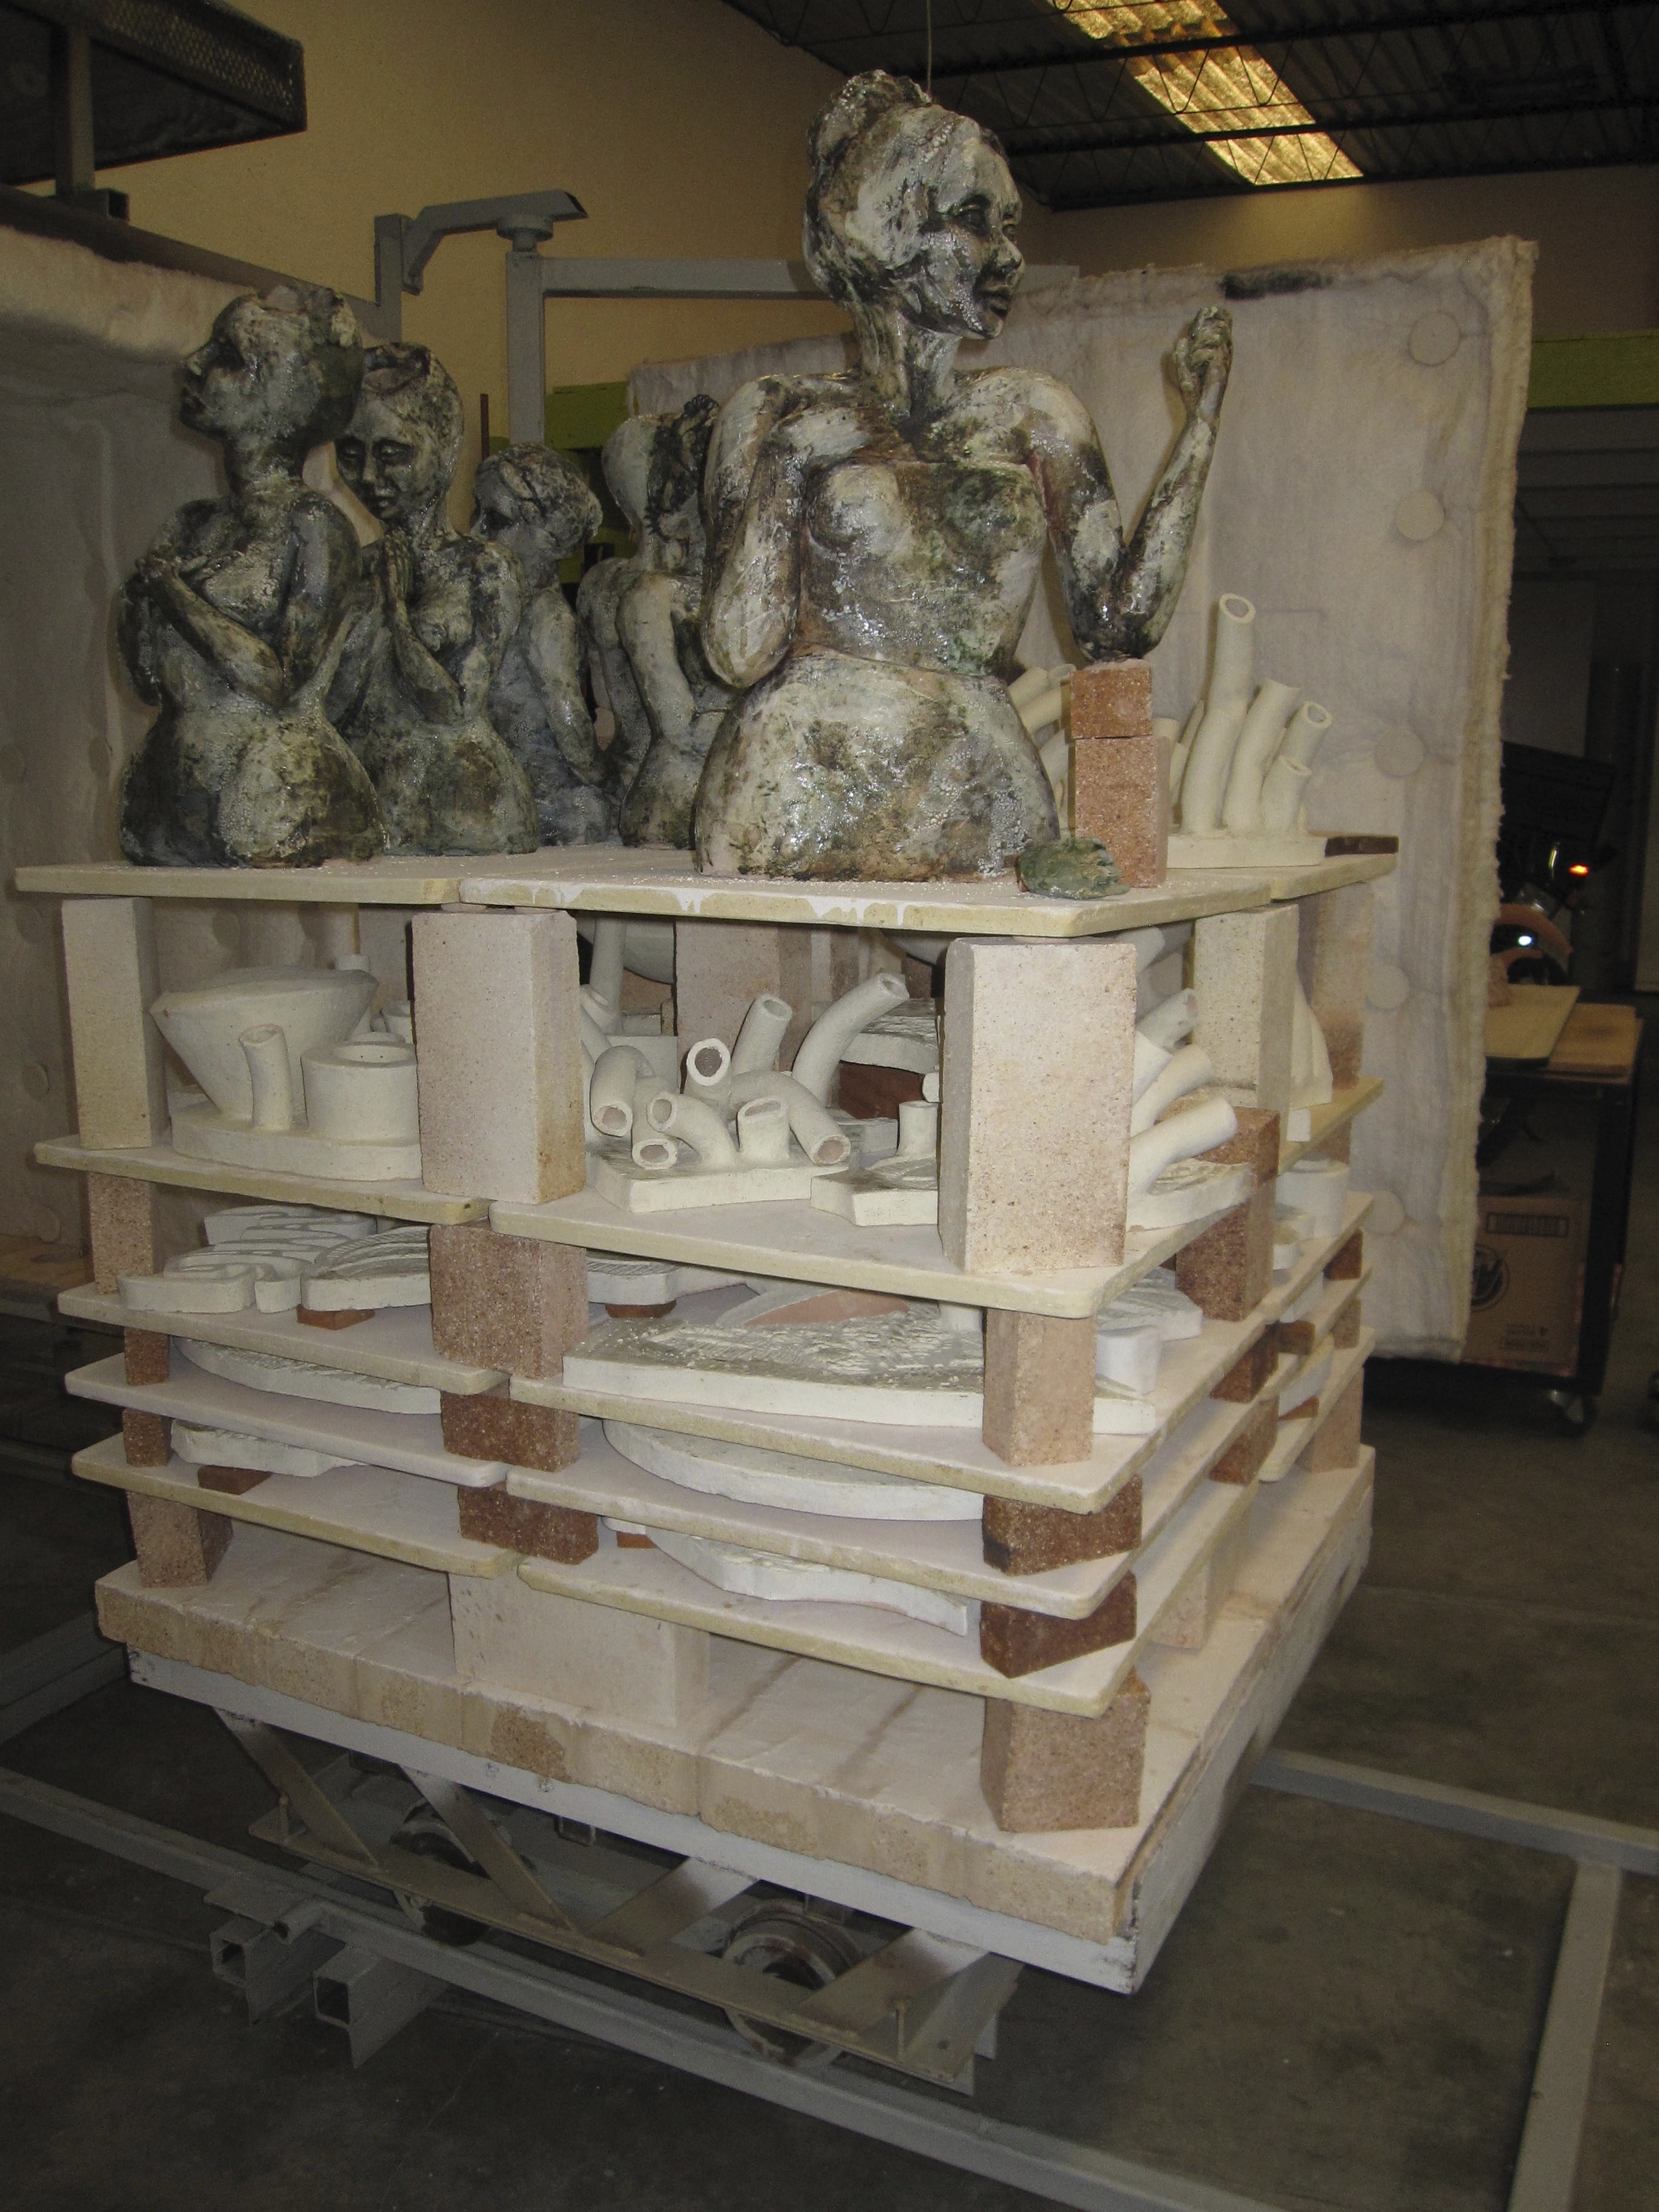 kiln ready to unload - female figure sculptures by Annie Evans